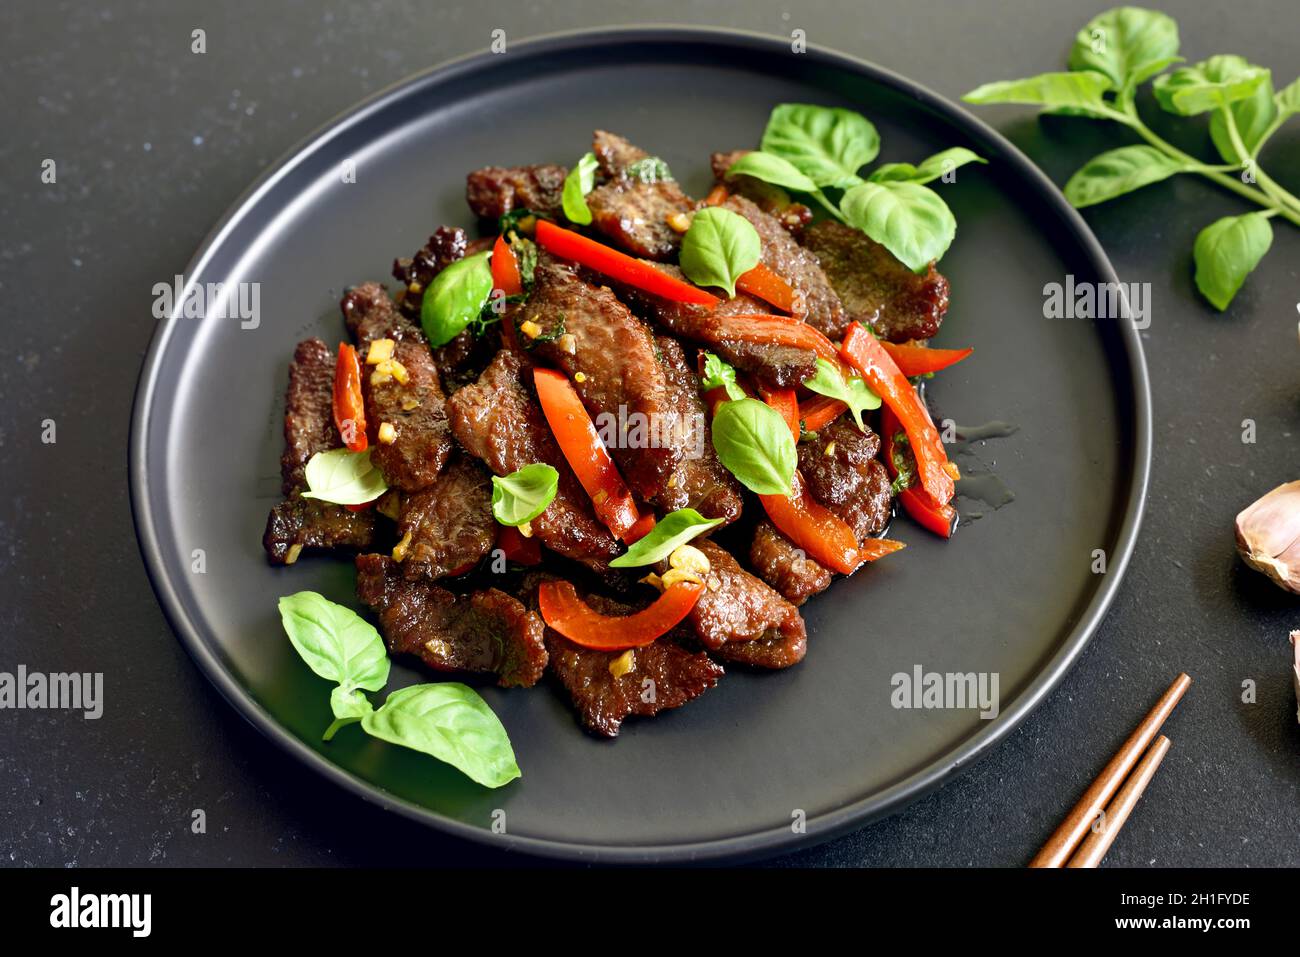 Thai beef stir-fry with pepper and basil on plate, close up view Stock Photo